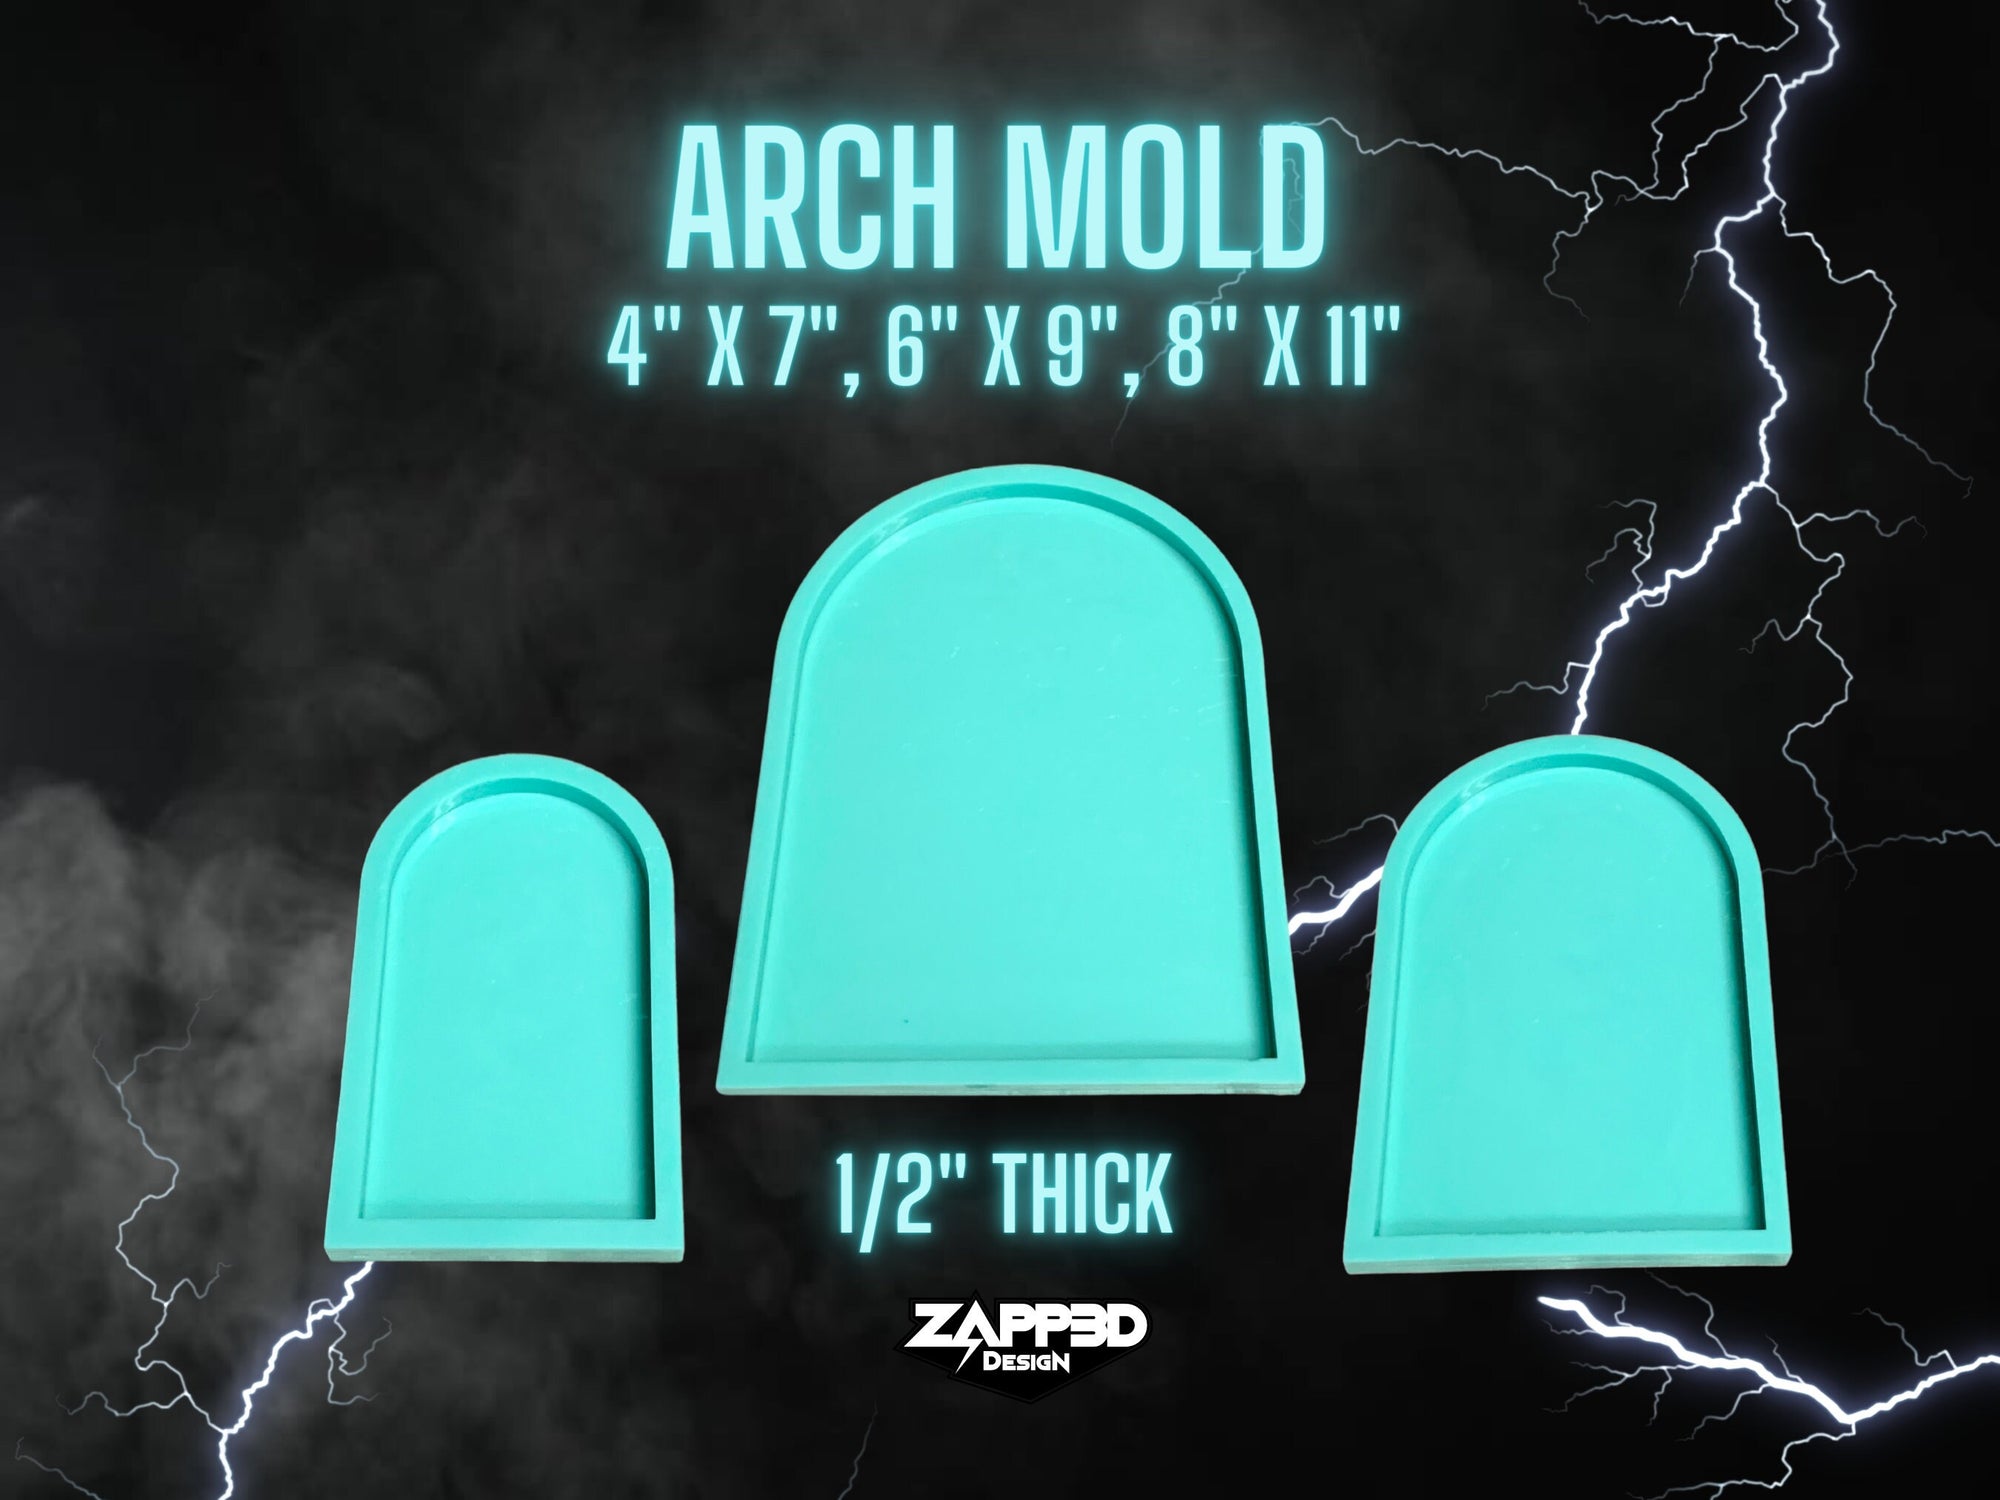 Arch Mold | 3 Sizes | ULTRA QUALITY MOLD, Arch Tray Mold, Flat Mold, Deep Mold